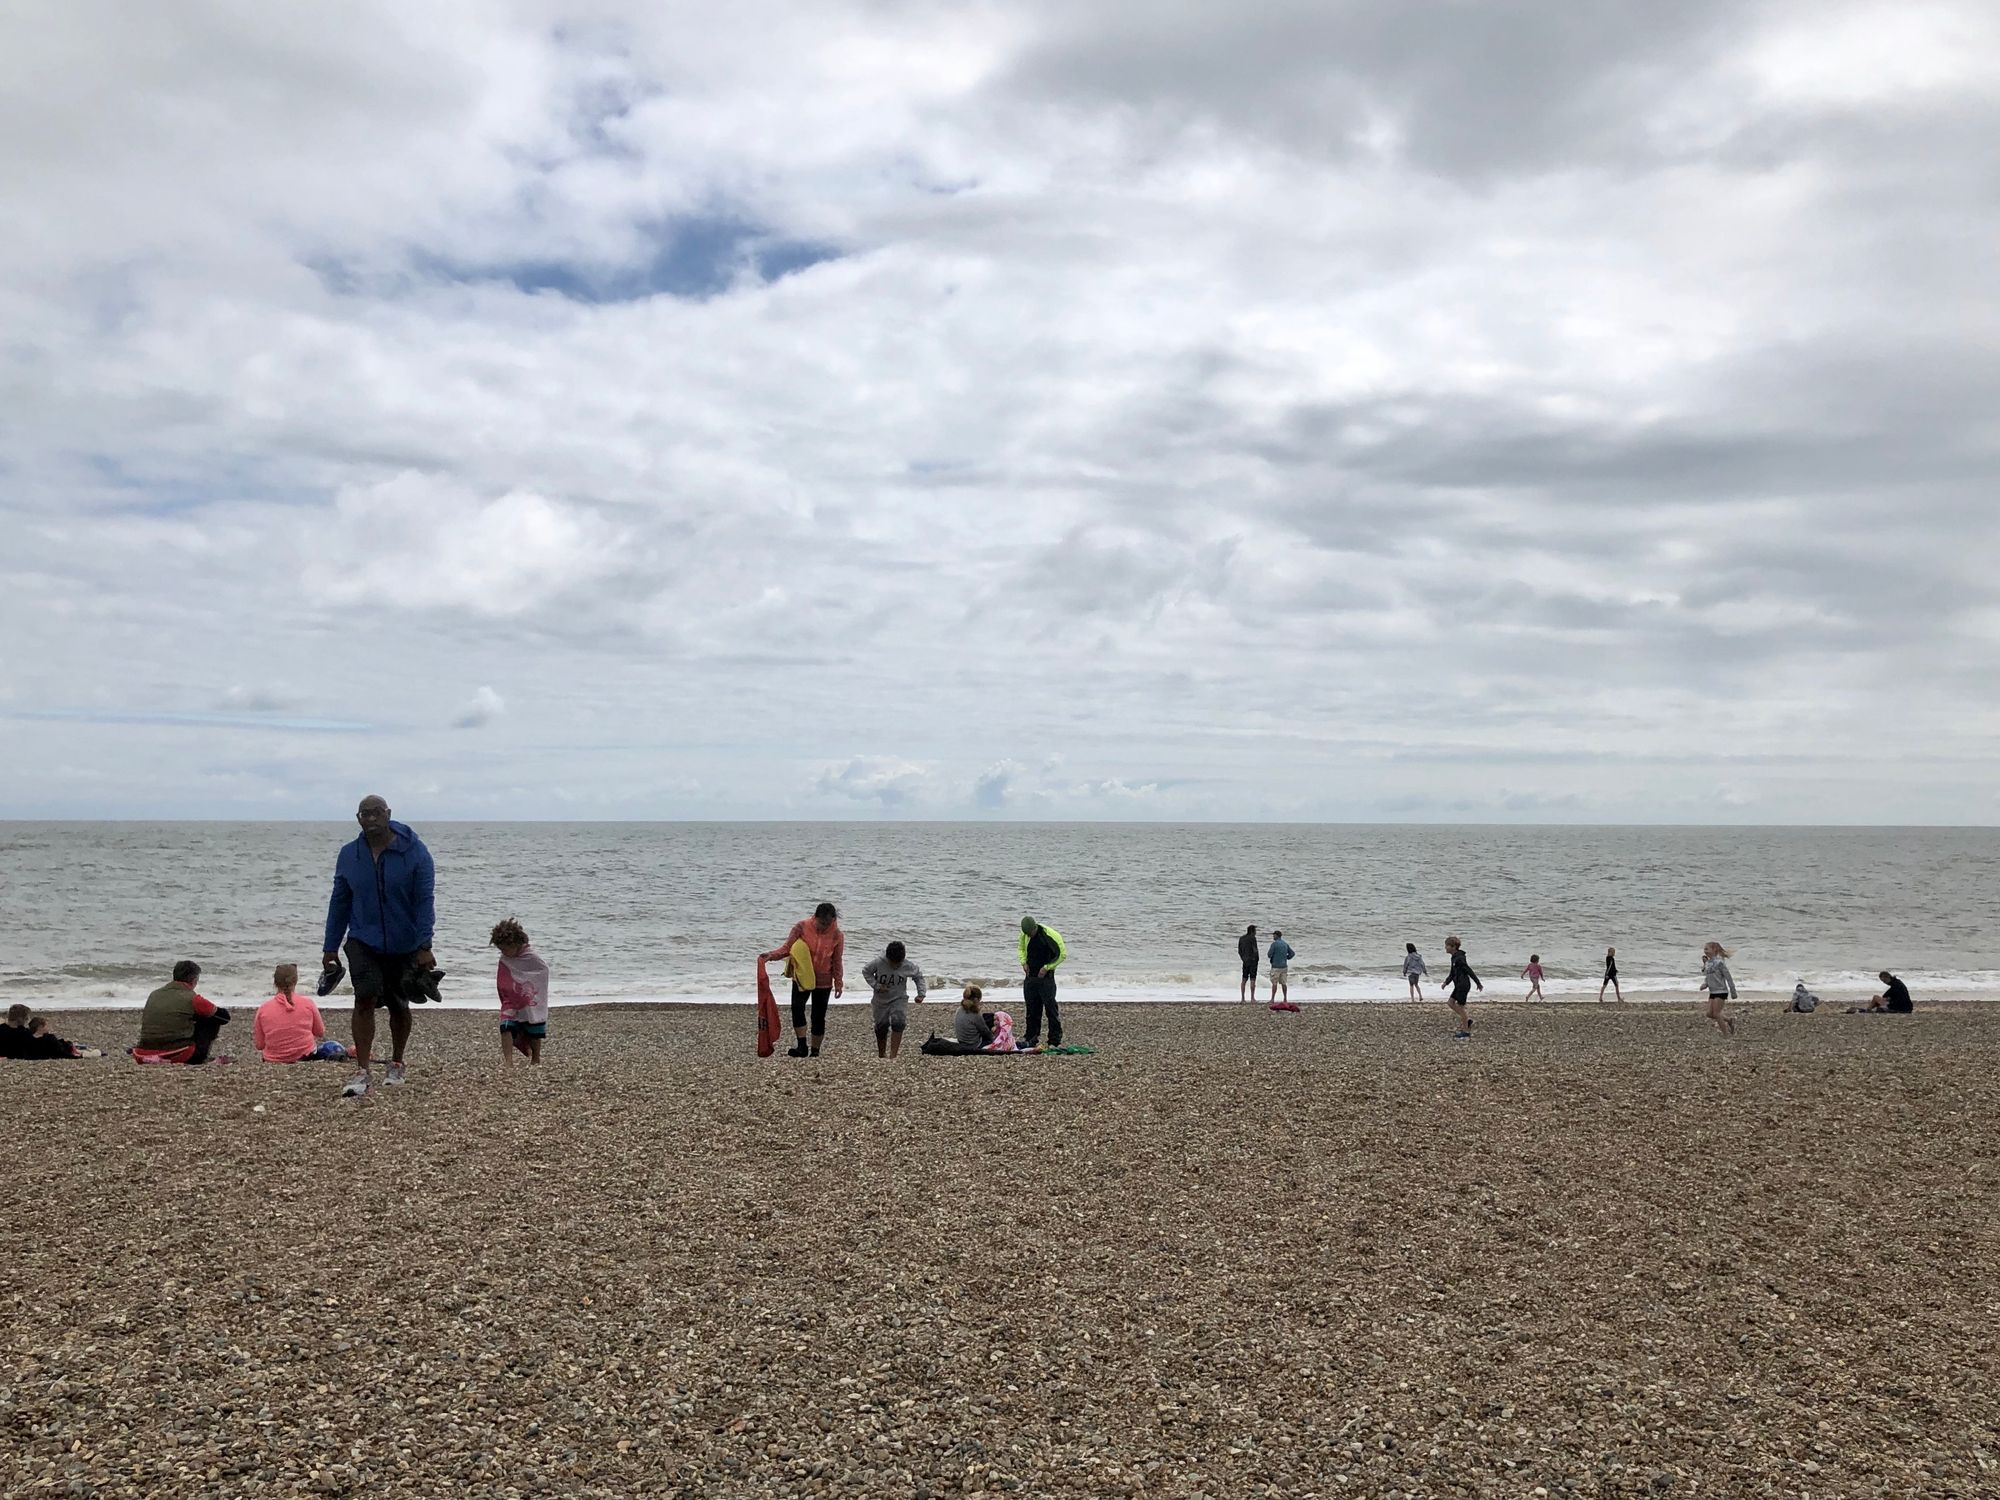 A steep shingle beach with various people standing on it.